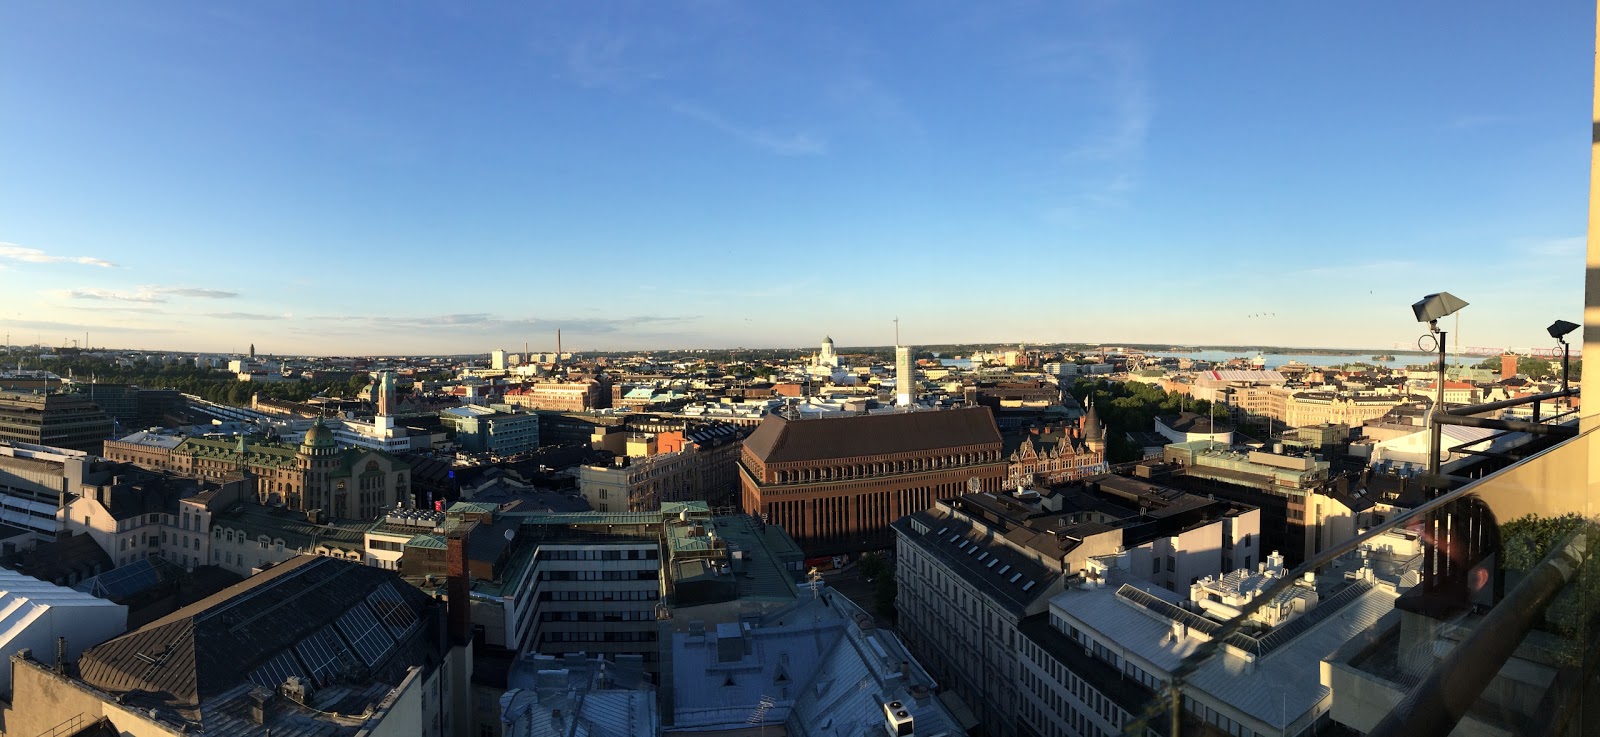 The pano from the top of the Torni Hotel bar